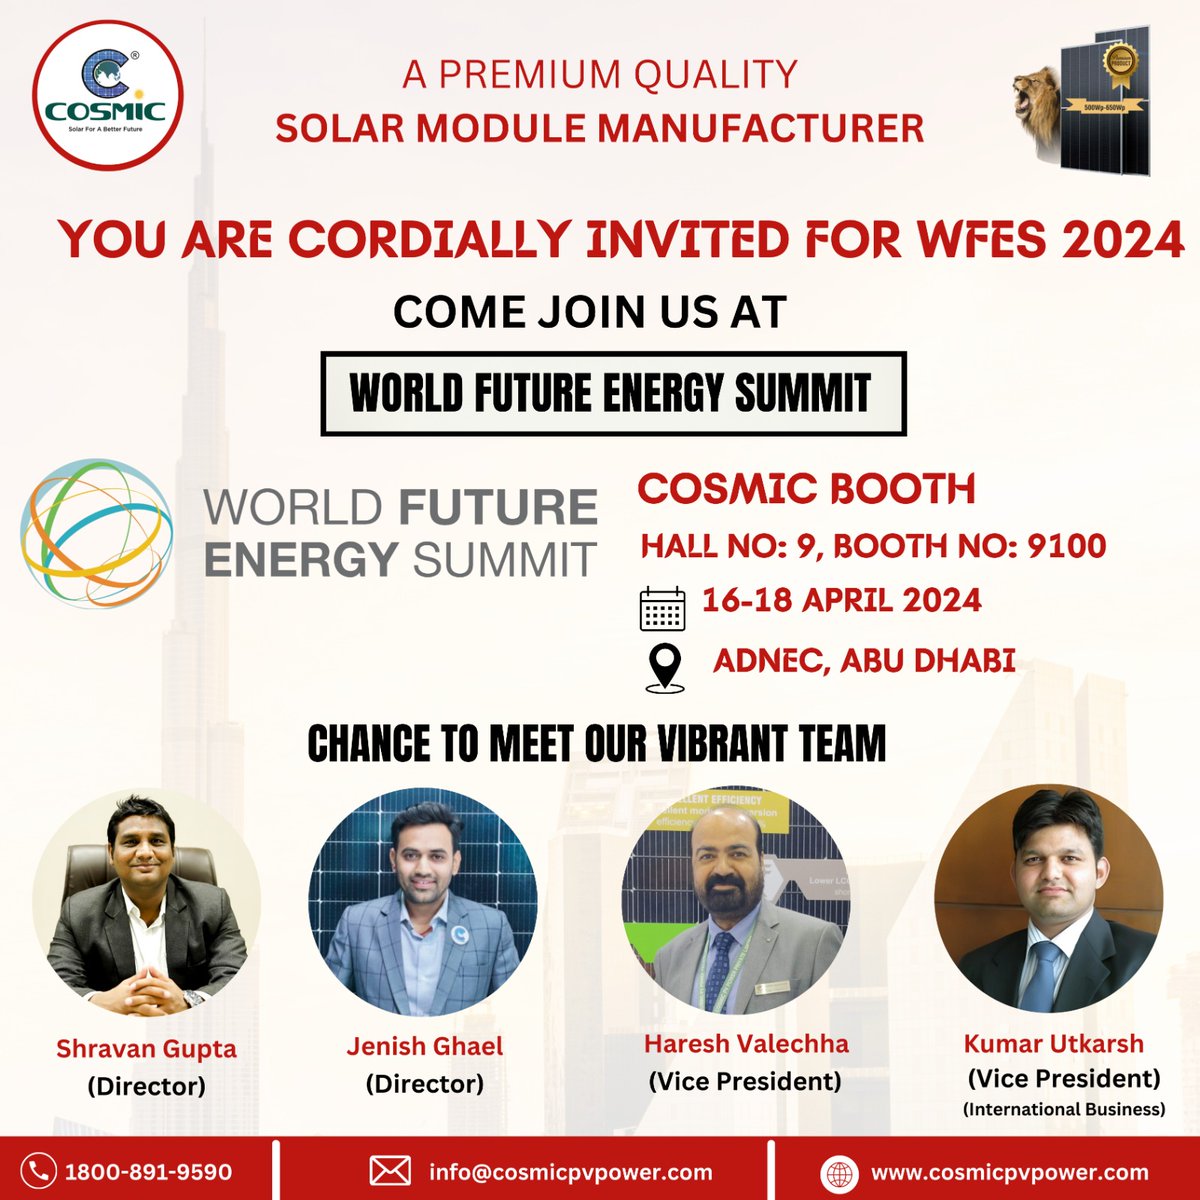 Hello everyone!! You are cordially invited to witness the greatest solar modules from Cosmic PV Power. Let’s meet our vibrant team at WFES 2024, ADNEC, ABU Dhabi from 16th to 18th April 2024. Don’t miss out on this opportunity. Your attendance would be greatly valued. Thank You!!